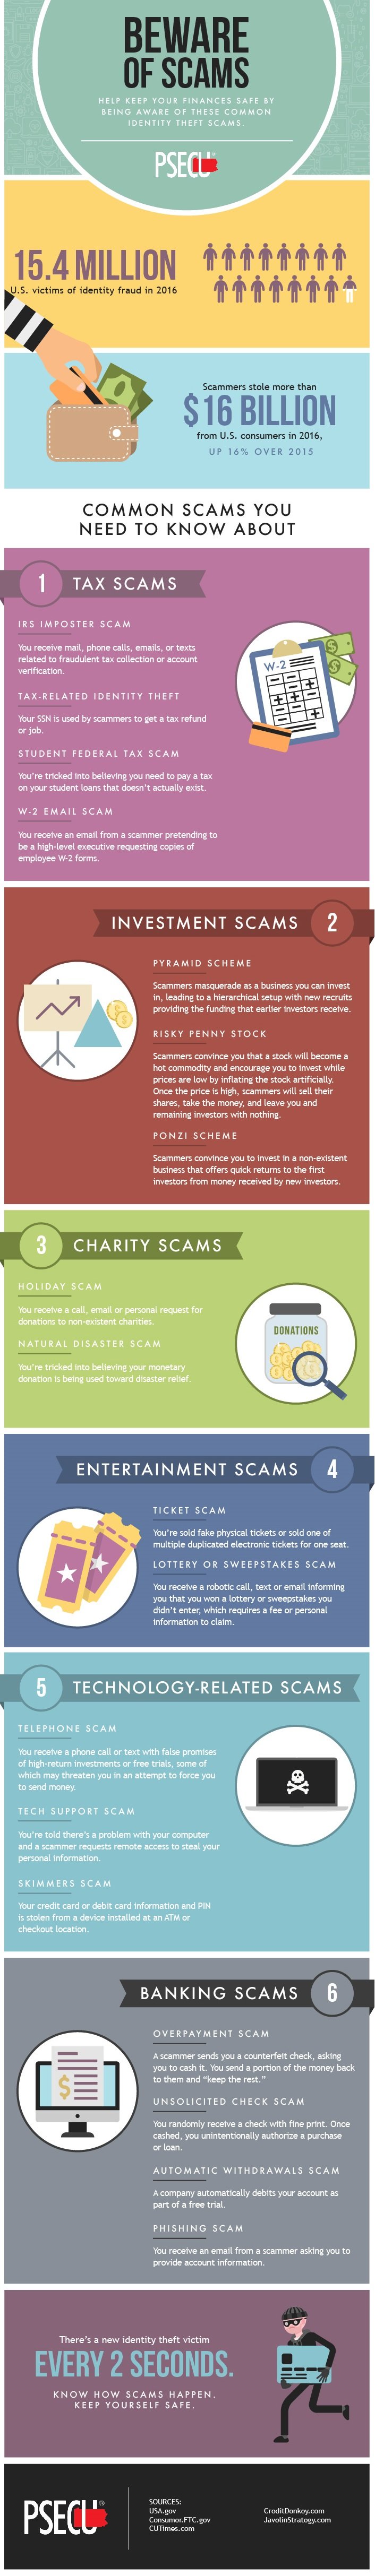 Beware of these financial and identity theft scams